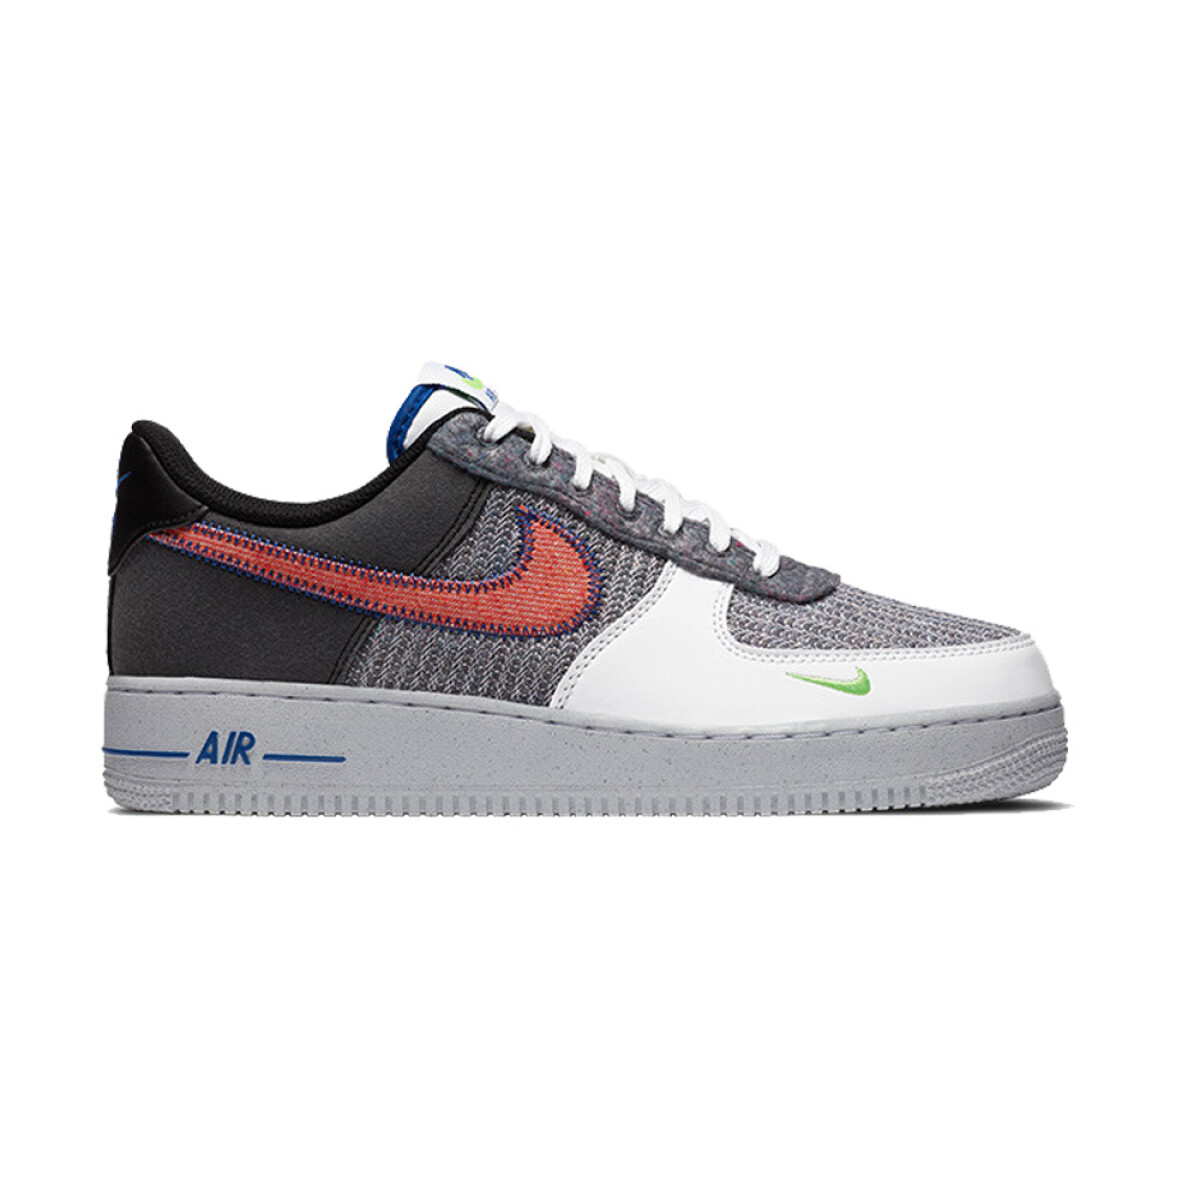 Nike Air Force 1 Low Electric Green - Grey/Black/Red 